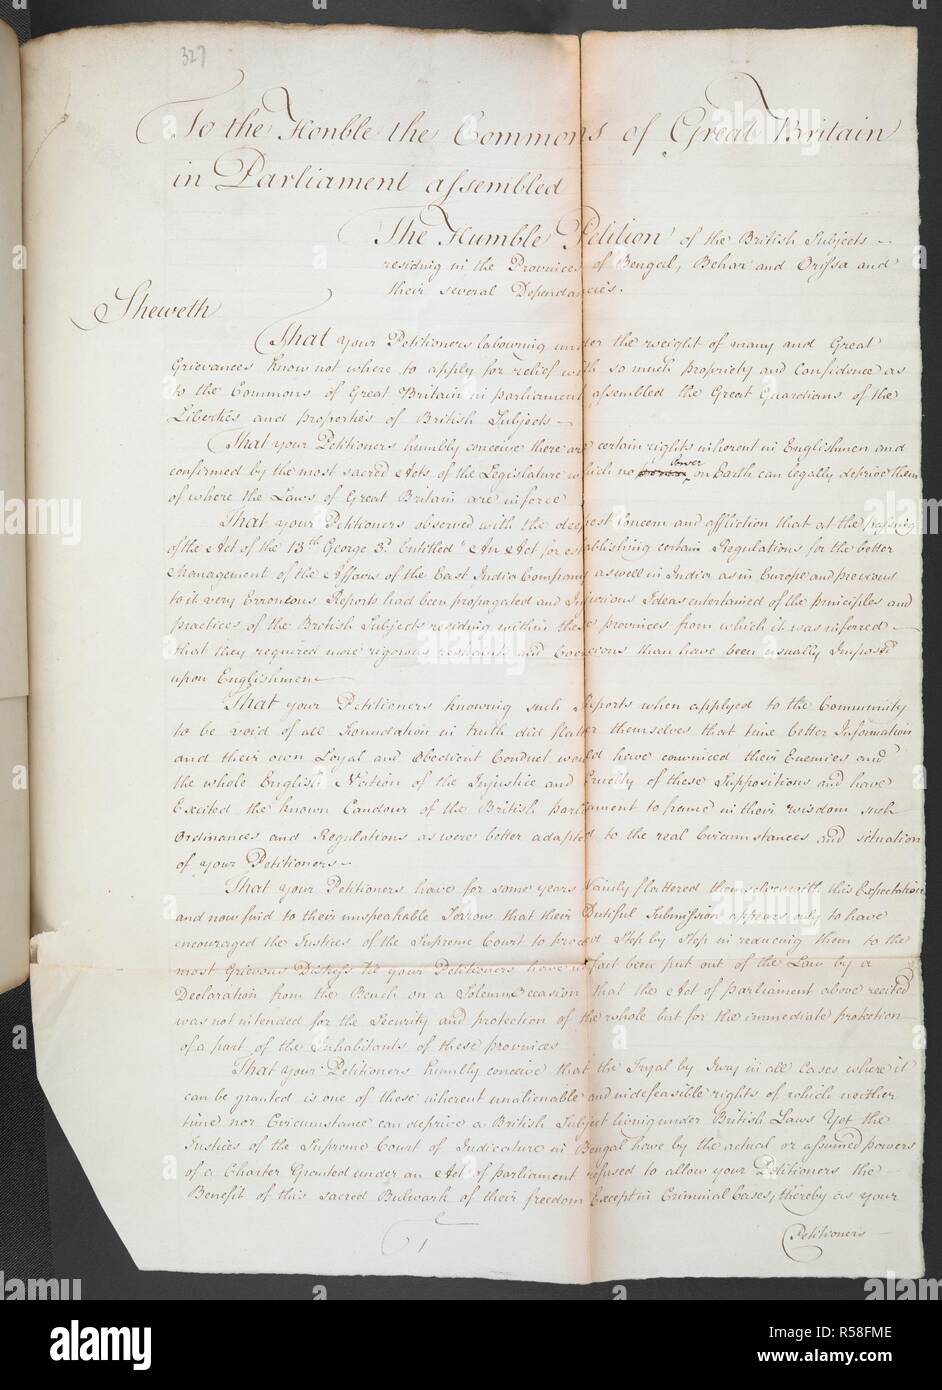 Humble Petition of the British Subjects. In 1773 the British government established the Supreme Court of Judicature for Bengal. Controversially, the court limited the use of juries to criminal cases, while at the same time it effectively extended English law to Indians in the region by admitting their lawsuits. As this petition shows, the Supreme Court was resented by many British expatriates, who felt that it weakened their authority and undermined â€˜the Great Charter of British Libertiesâ€™. Ill-feeling reached its peak in the 1779 civil trial of James Creassy, Superintendent of Public Work Stock Photo